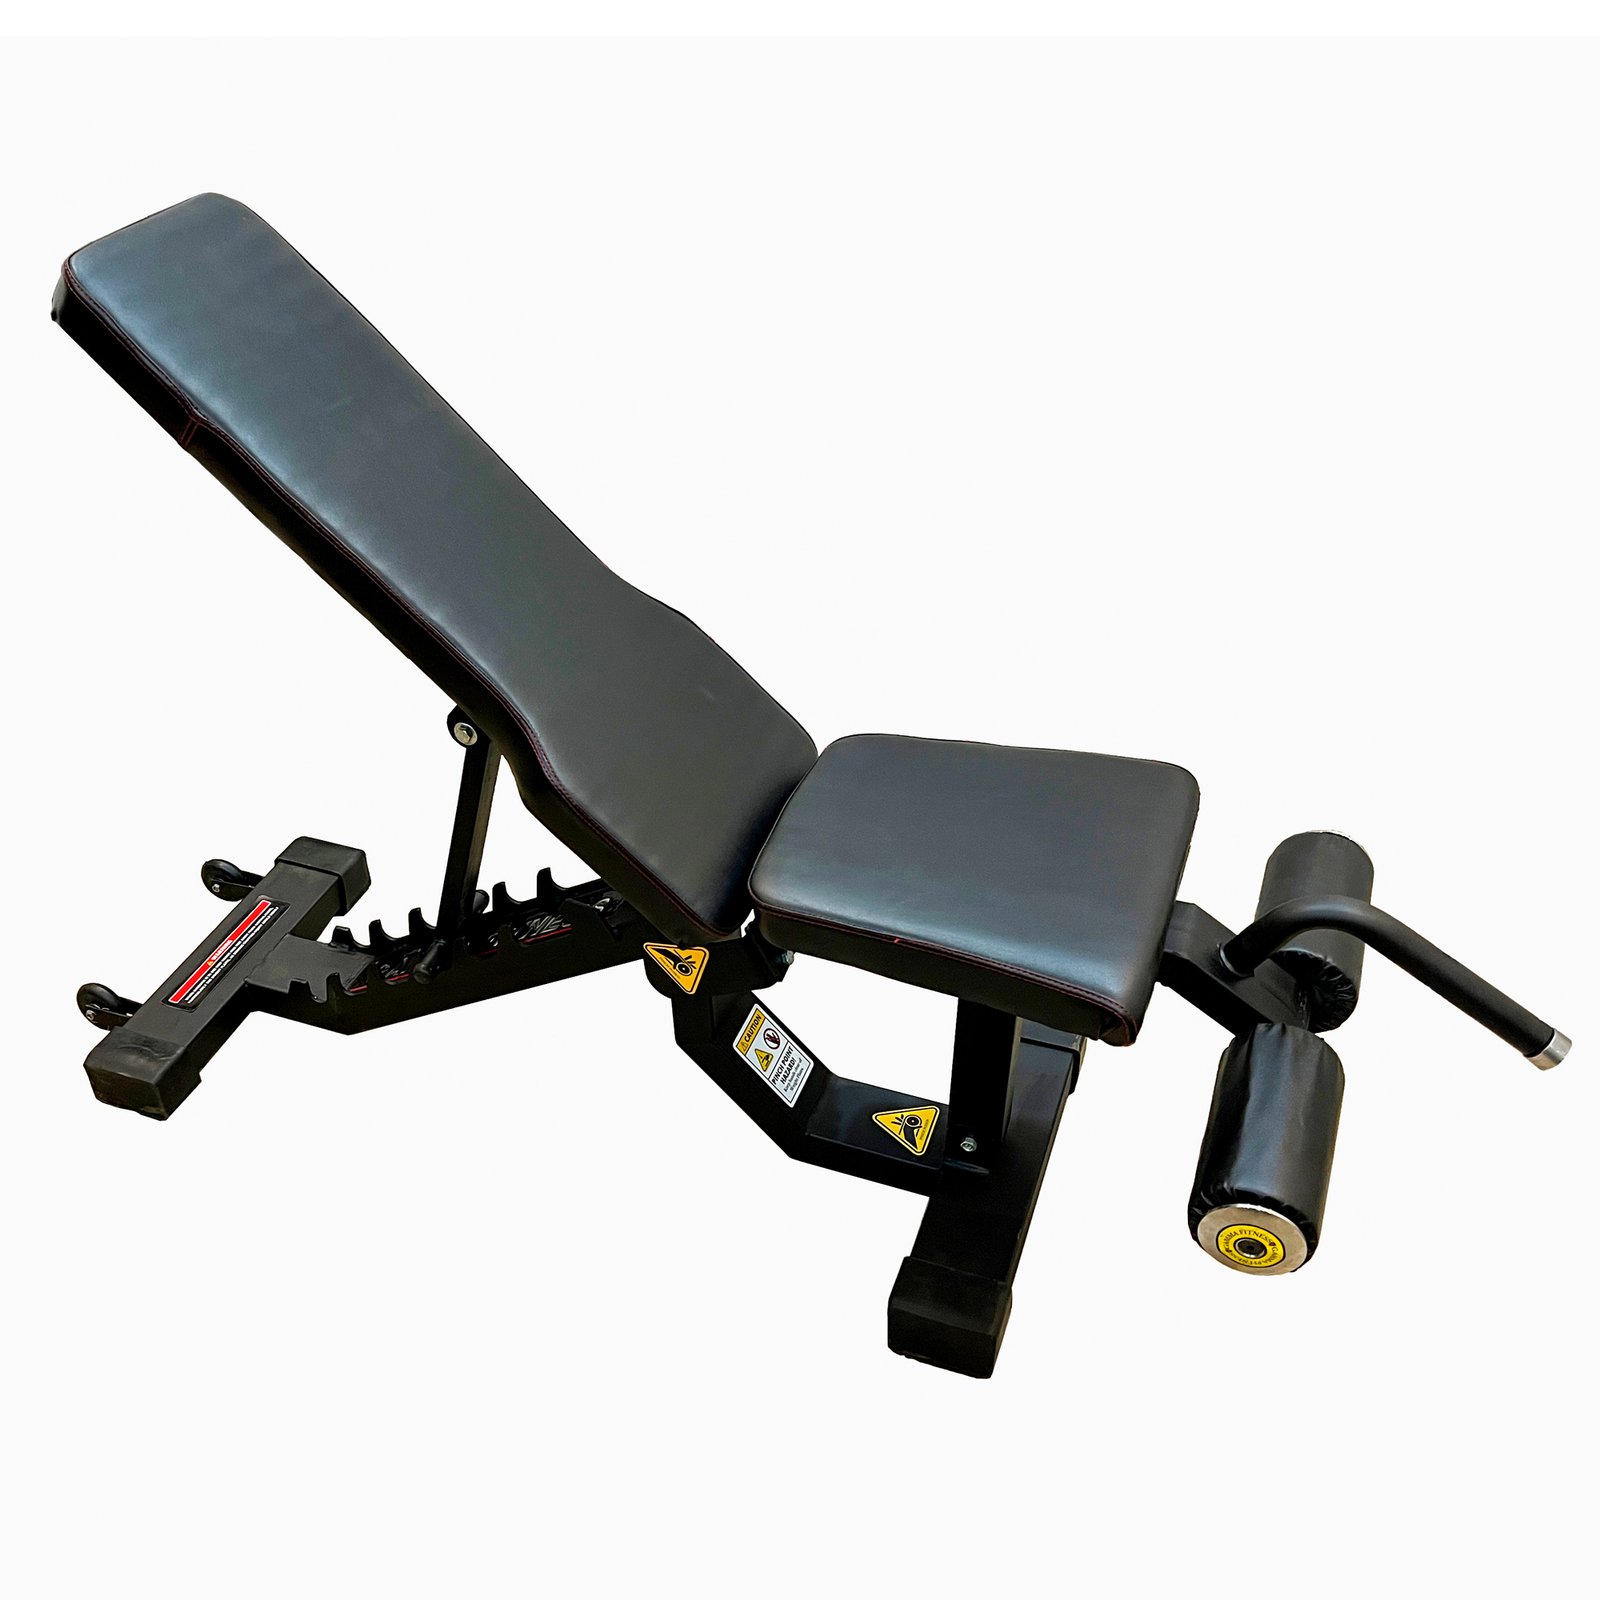 Buy Exercise Bench Online Commercial Adjustable Bench